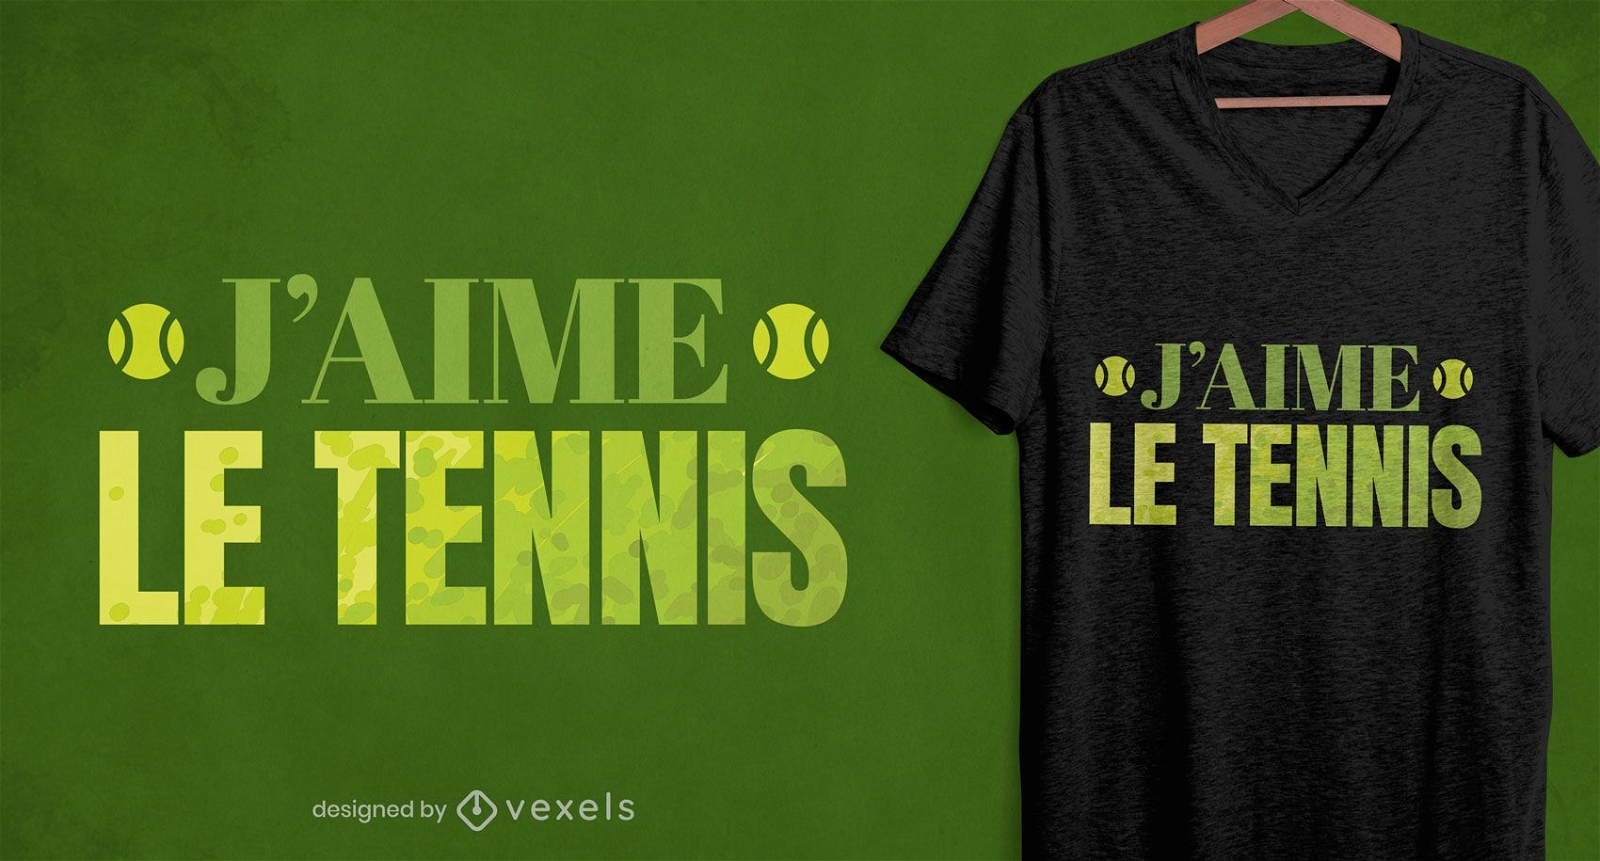 Tennis lover french quote t-shirt design